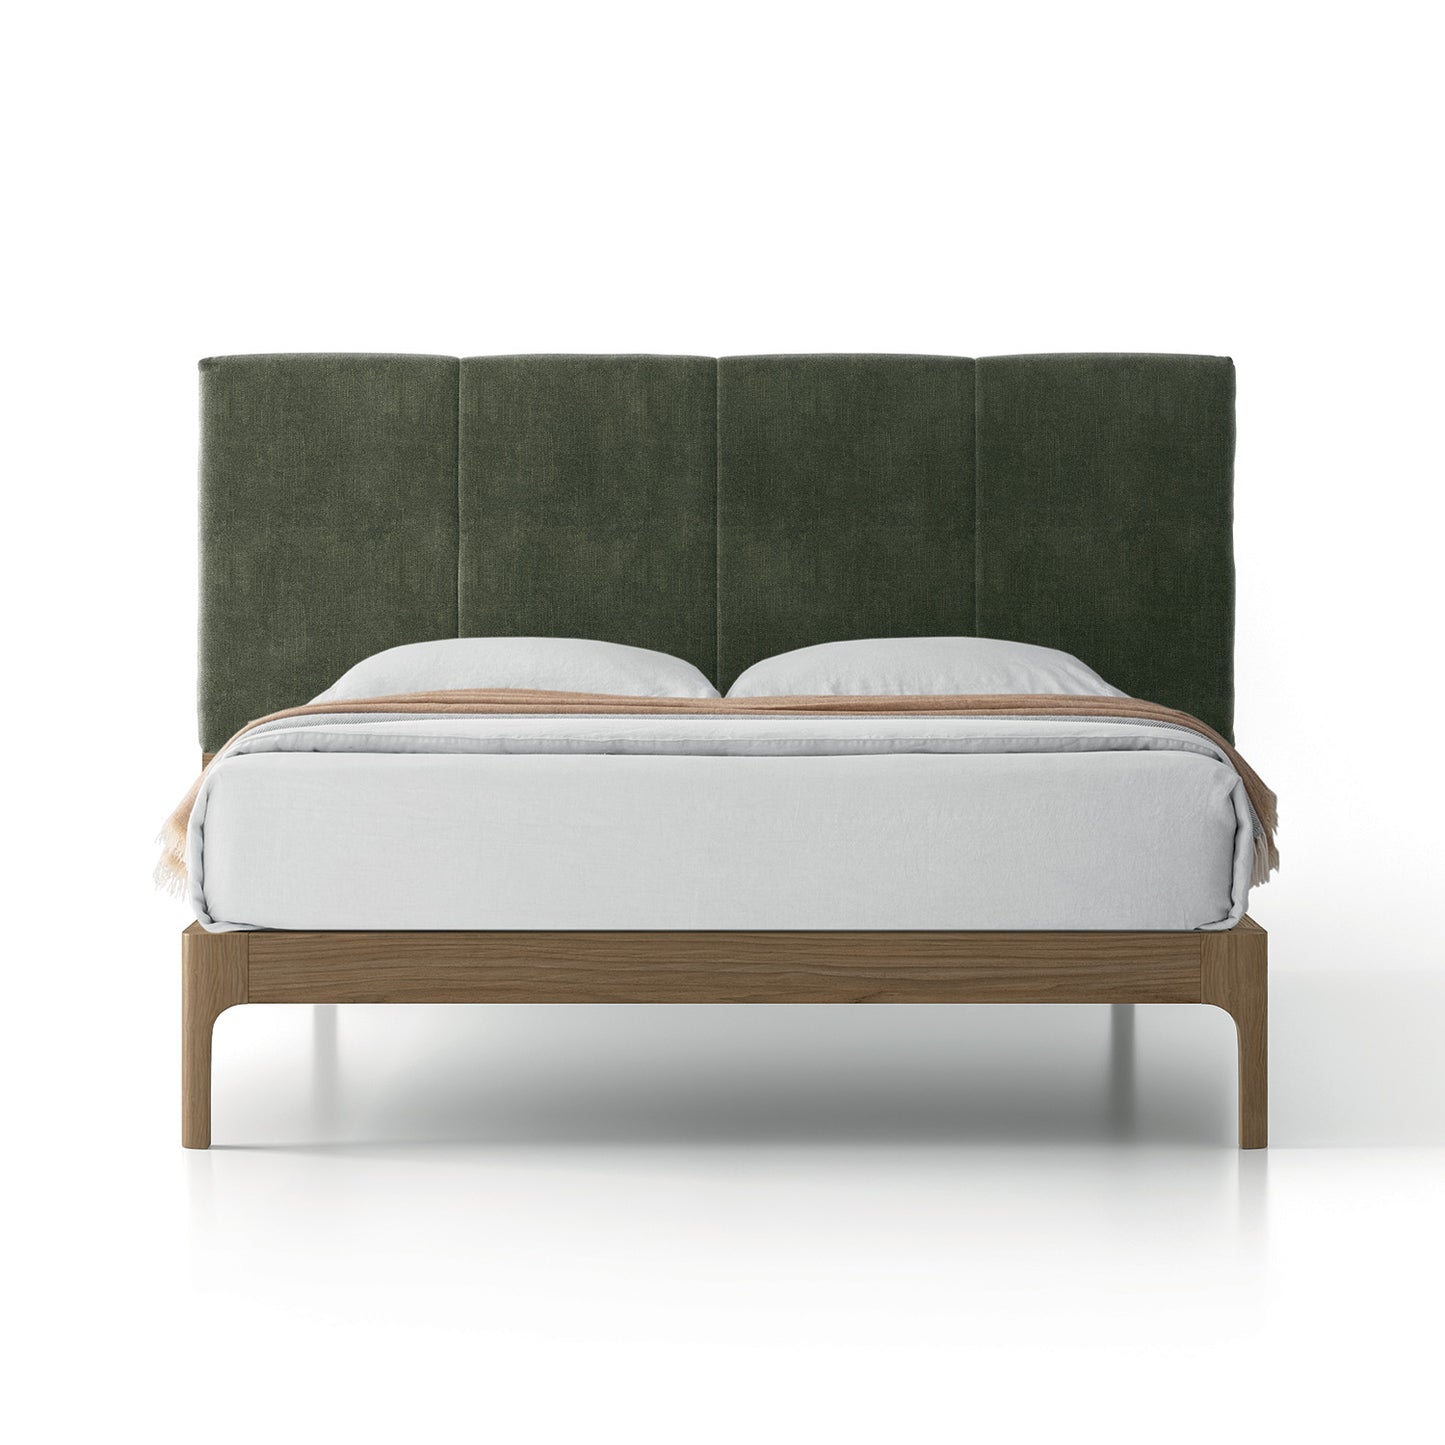 Zefiro Systems Bed by Santa Lucia